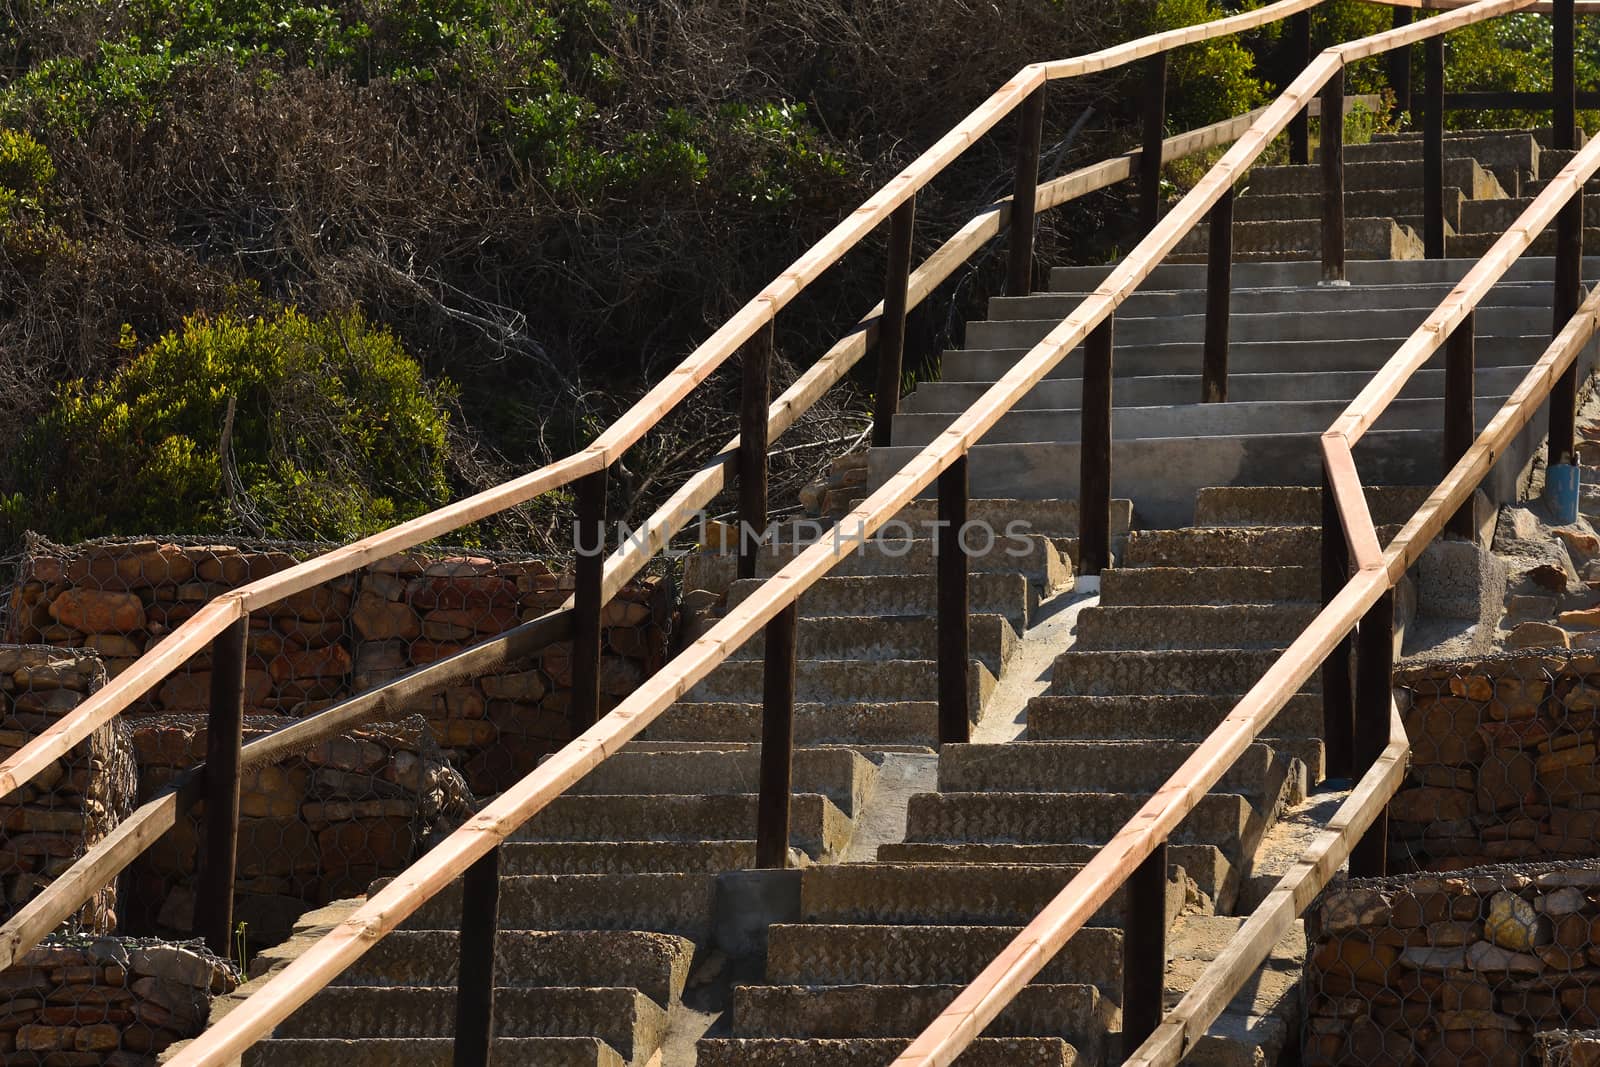 A beach exit cast concrete staircase with wooden handrails going uphill, Mossel Bay, South Africa